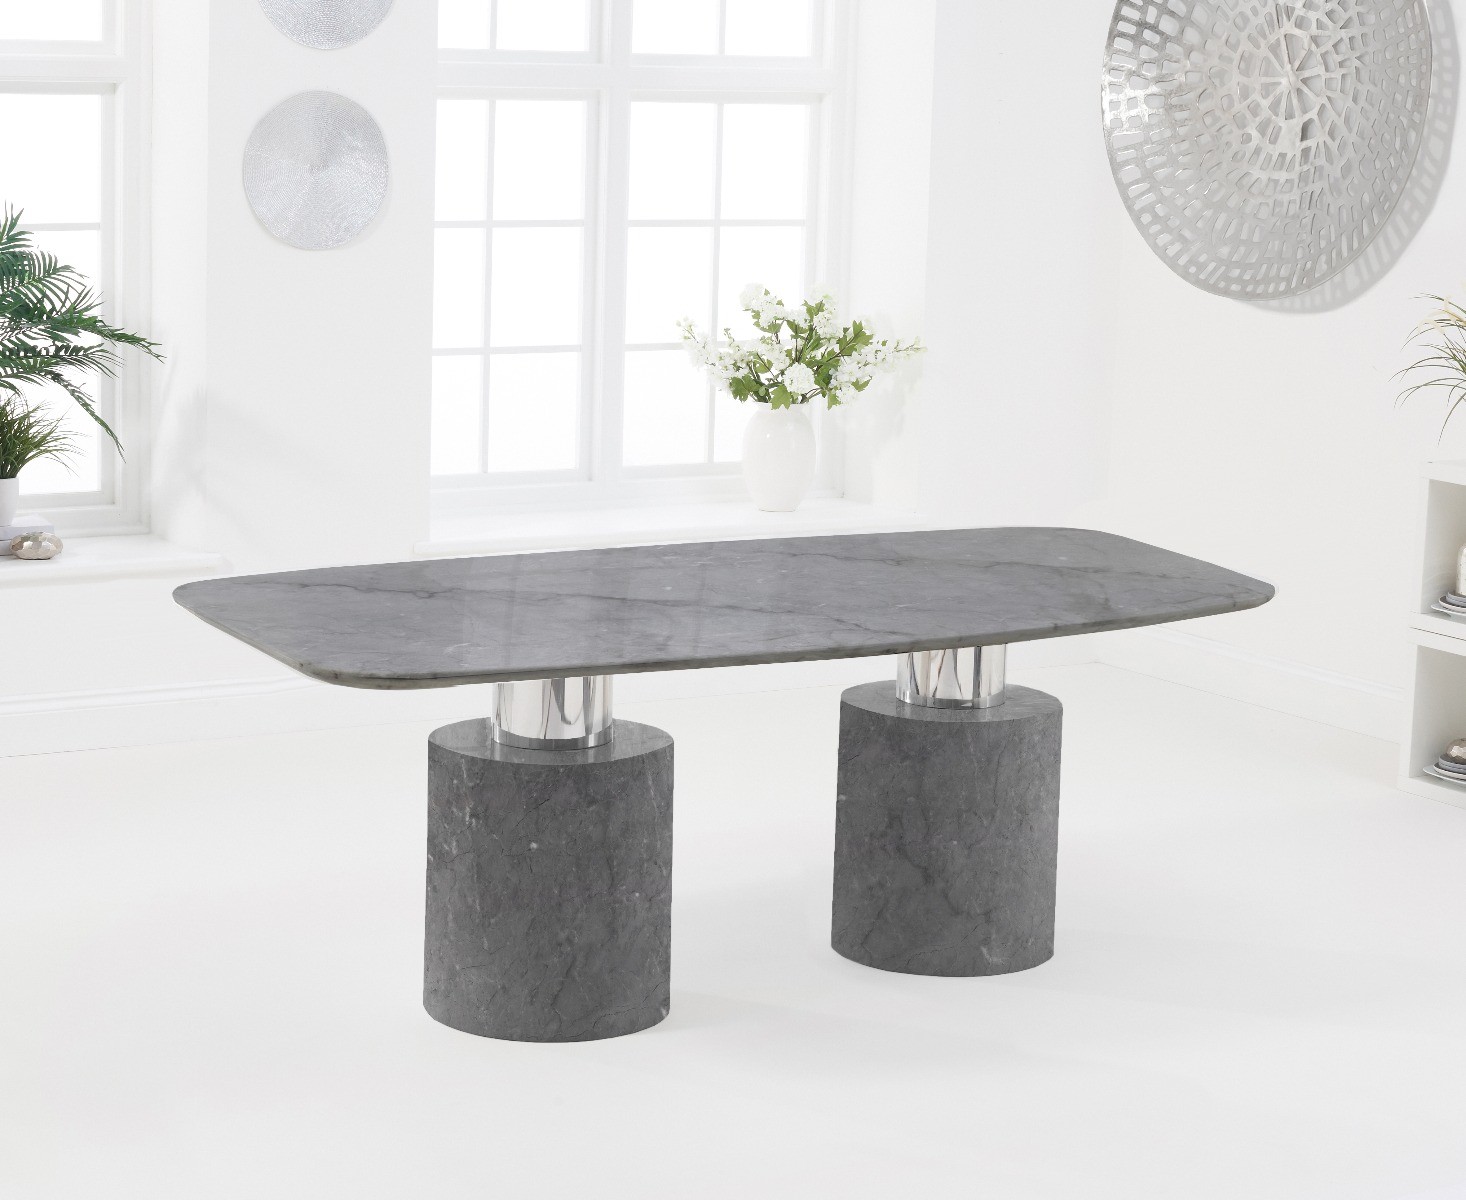 Photo 4 of Antonio 180cm grey marble dining table with 8 grey sophia chairs